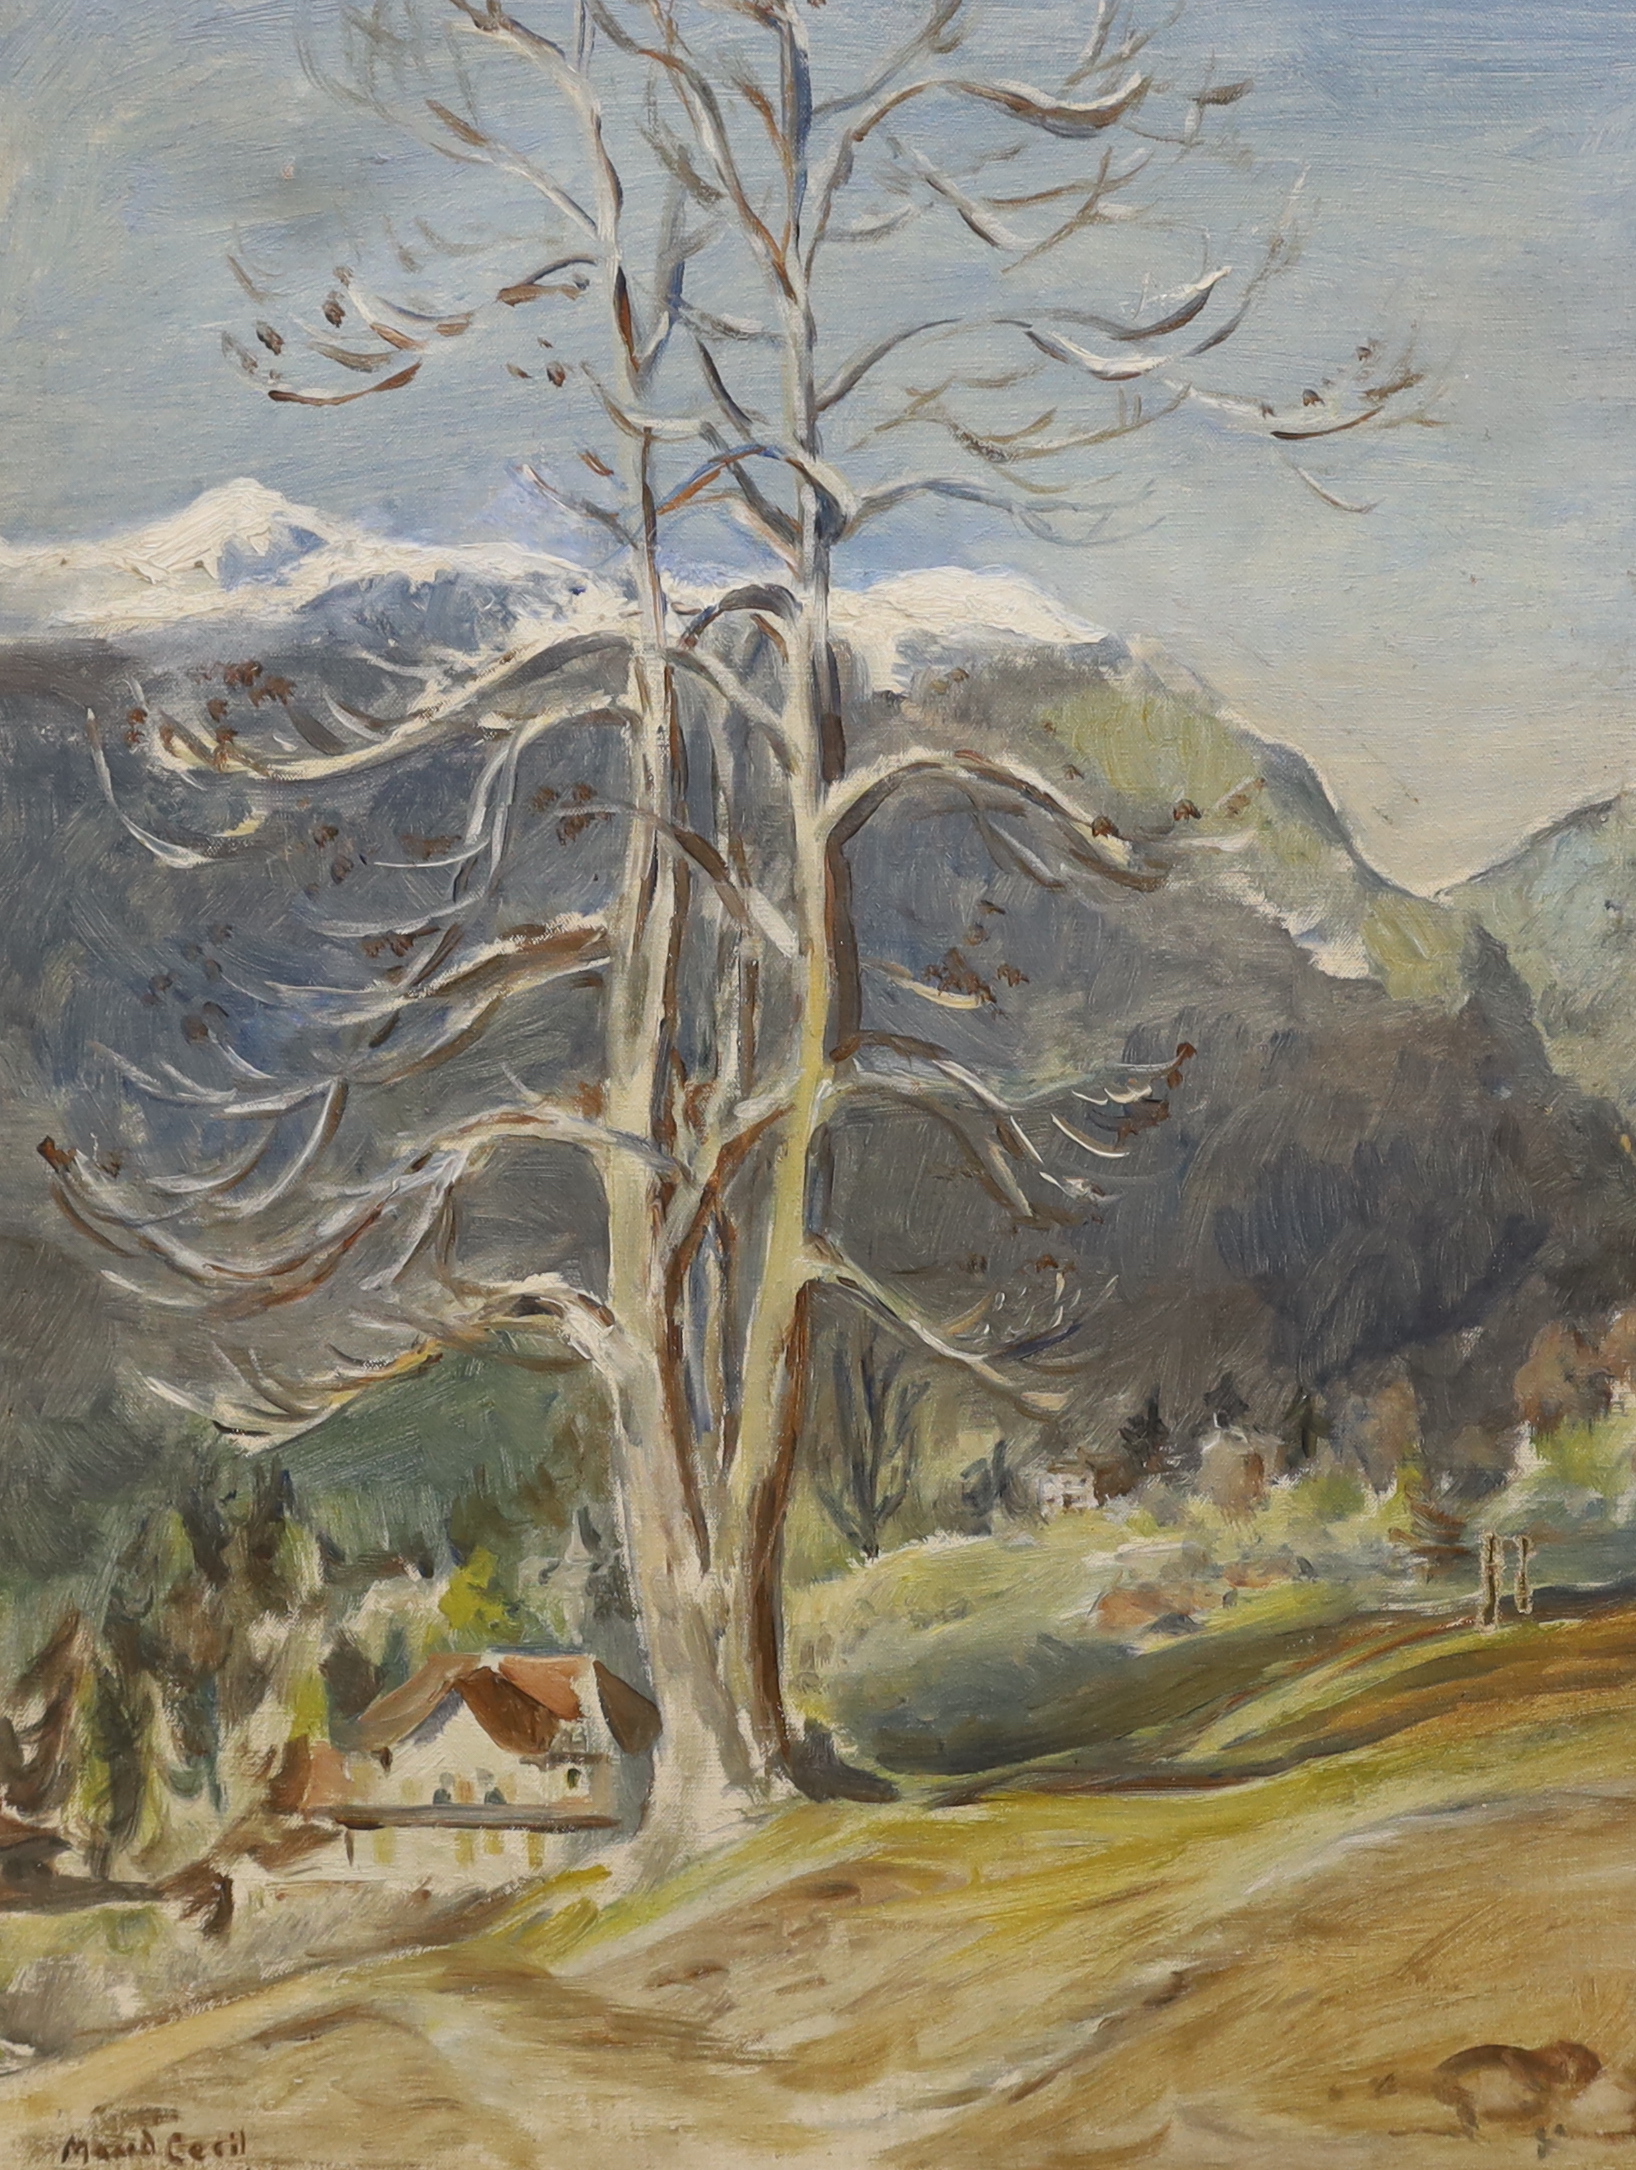 Hon. Maud Cecil (1904-1981), oil on canvas, Swiss mountainous landscape with chalets, signed and dated 1949, 50 x 40cm, unframed